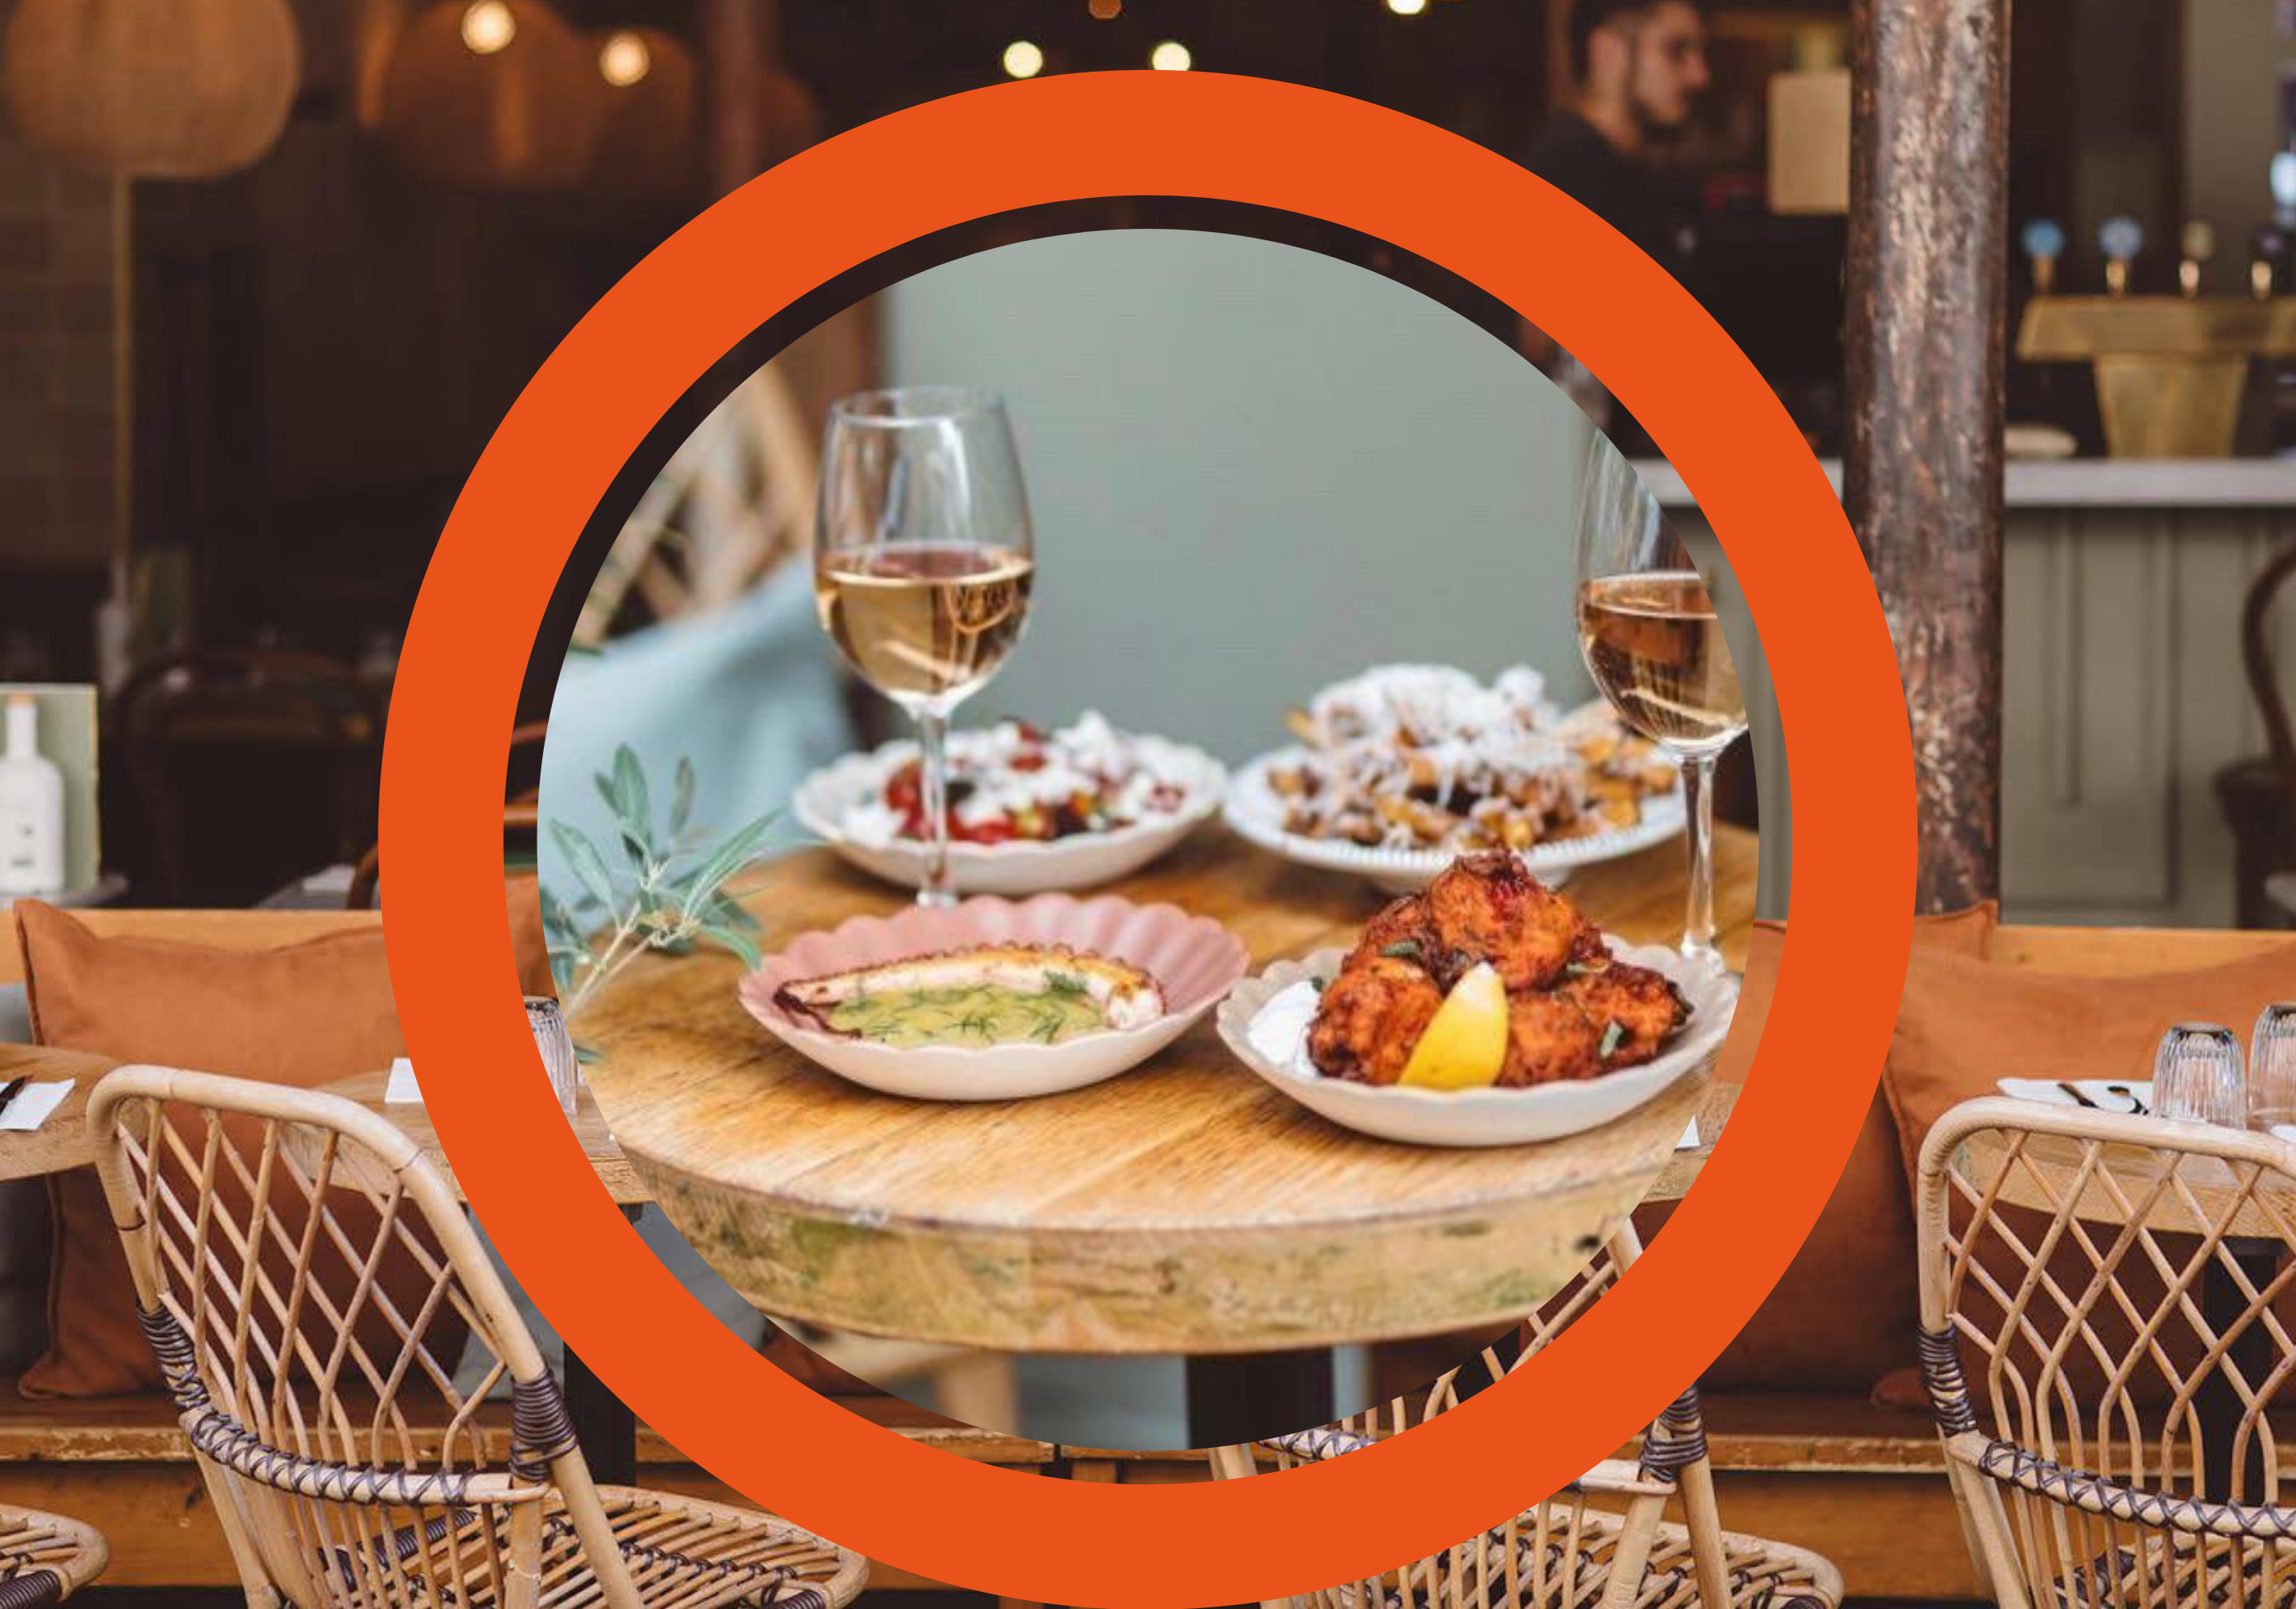 FOOD & DRINK | Mediterranean Wine & Tapas Bar to open in Hereford – MORE DETAILS